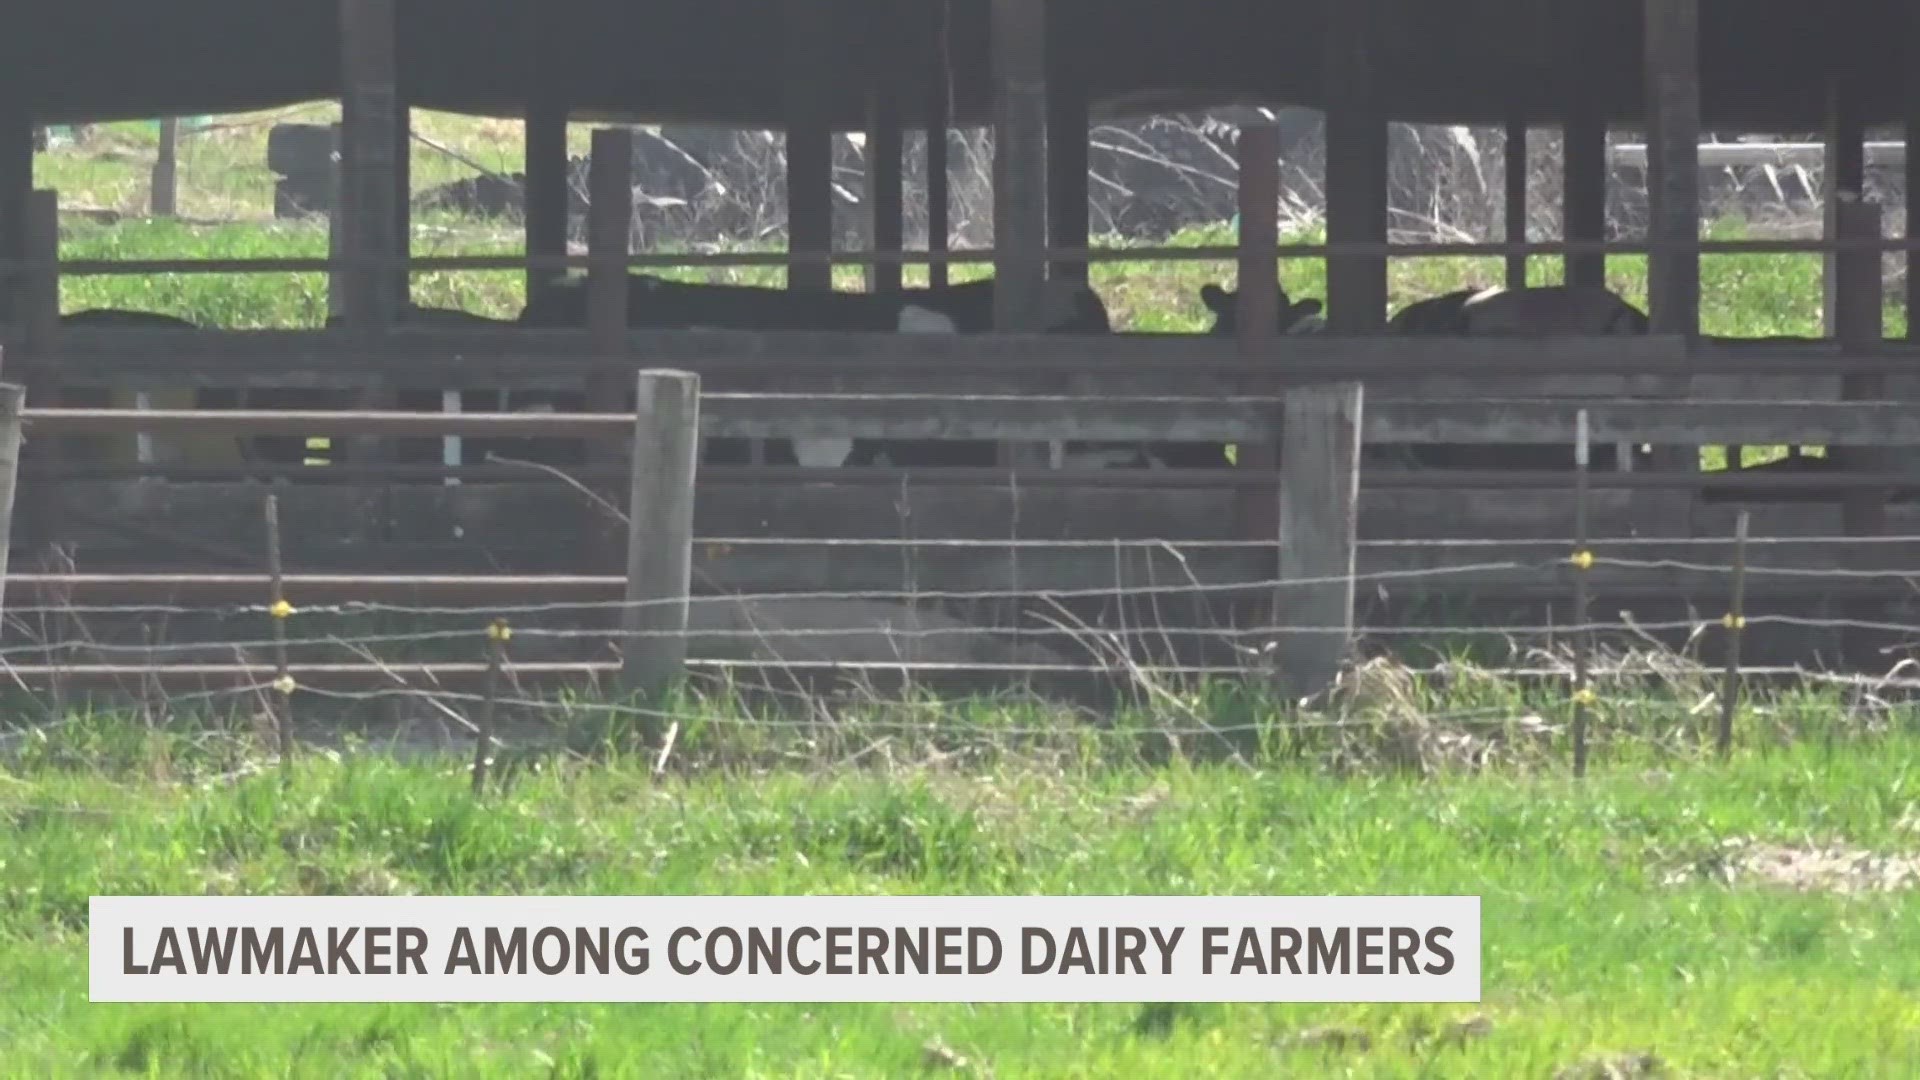 Representative Jerry Neyer, a Republican who represents Michigan's 92nd district, said they have about 20 dairy farms in the area he represents.